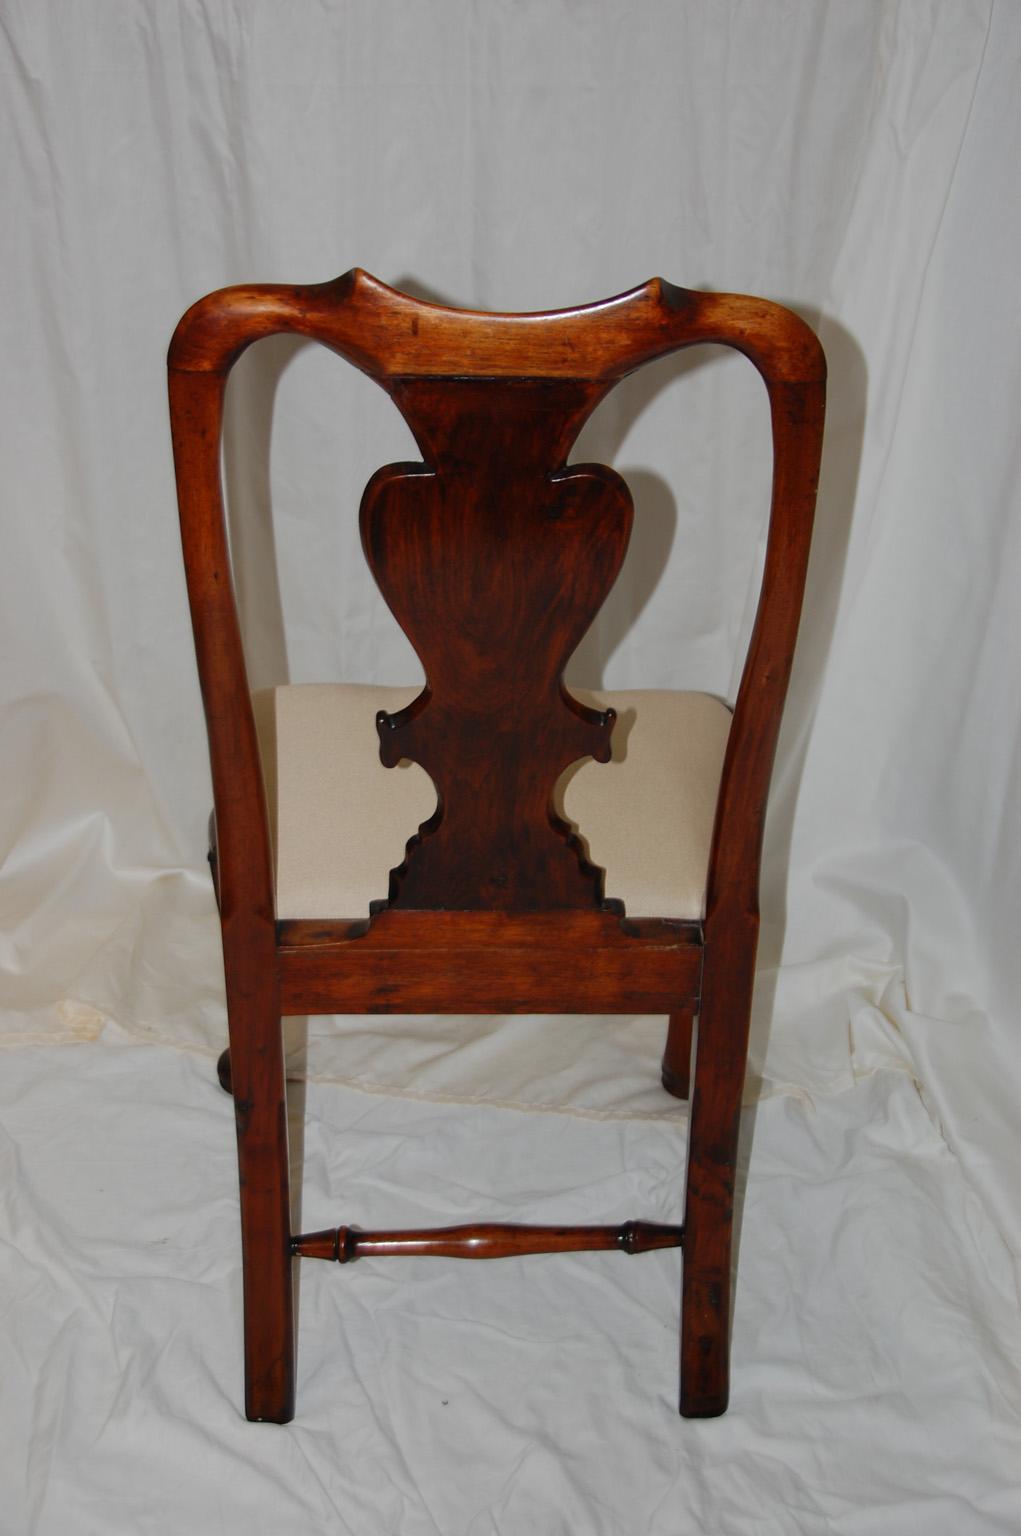 English Early 18th Century Queen Anne Walnut Side Chair with Cabriole Legs In Good Condition For Sale In Wells, ME